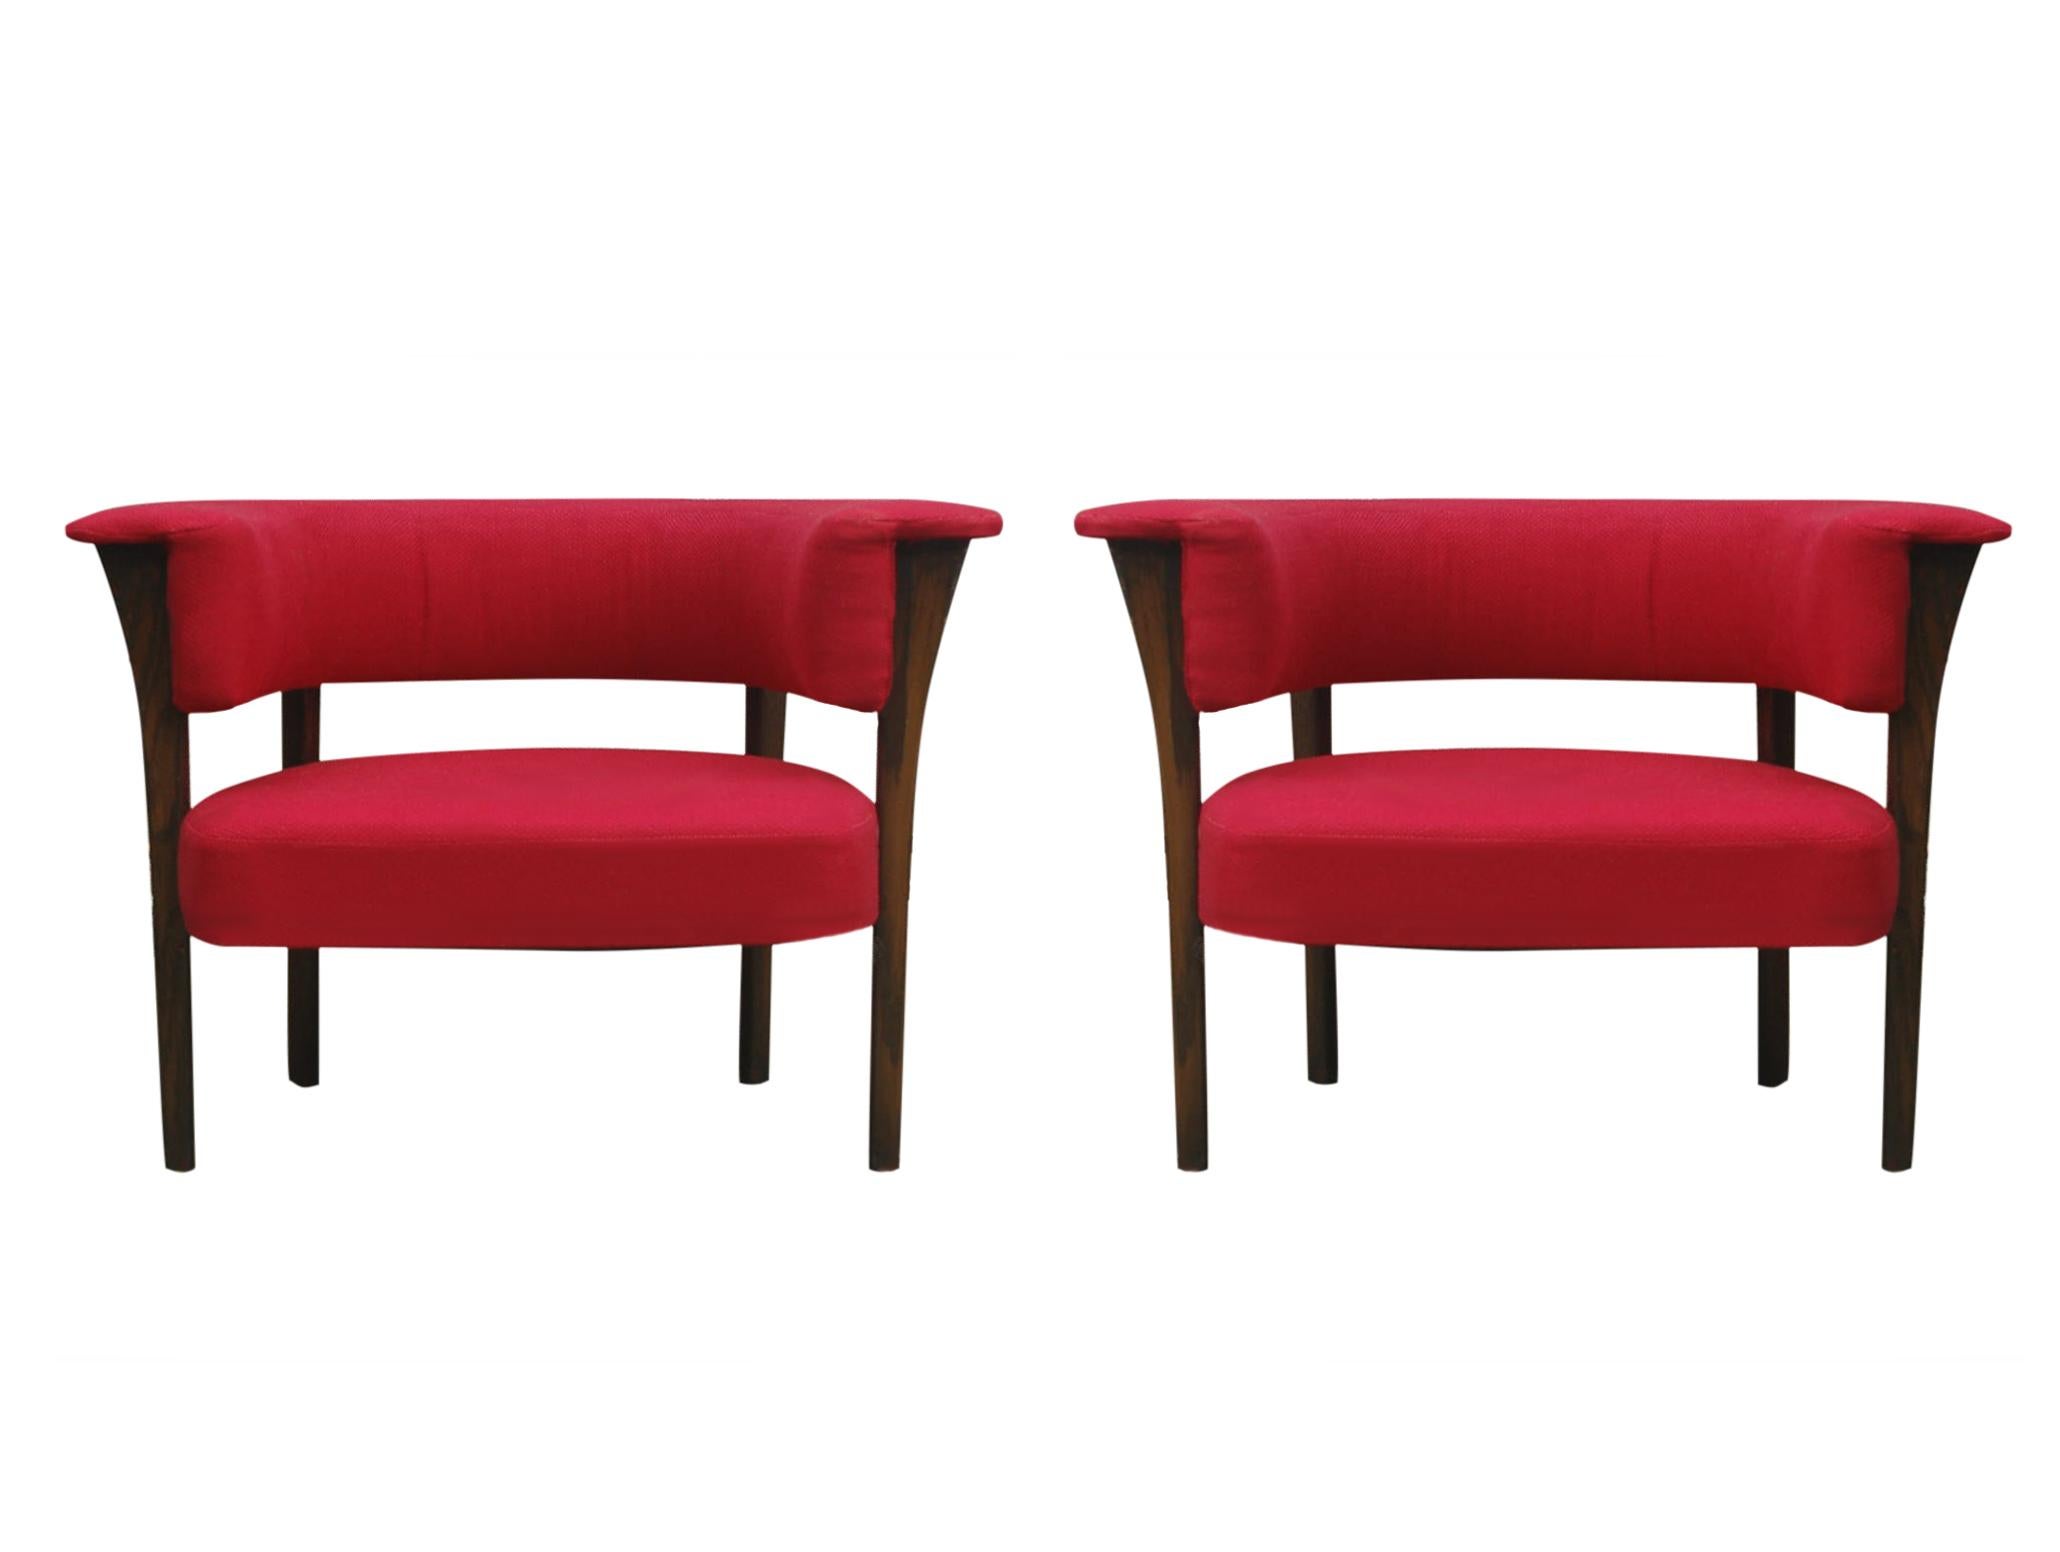 Late 20th Century Mid-Century Modern Barrel Back Lounge Chairs in Red Fabric with Walnut Oakwood